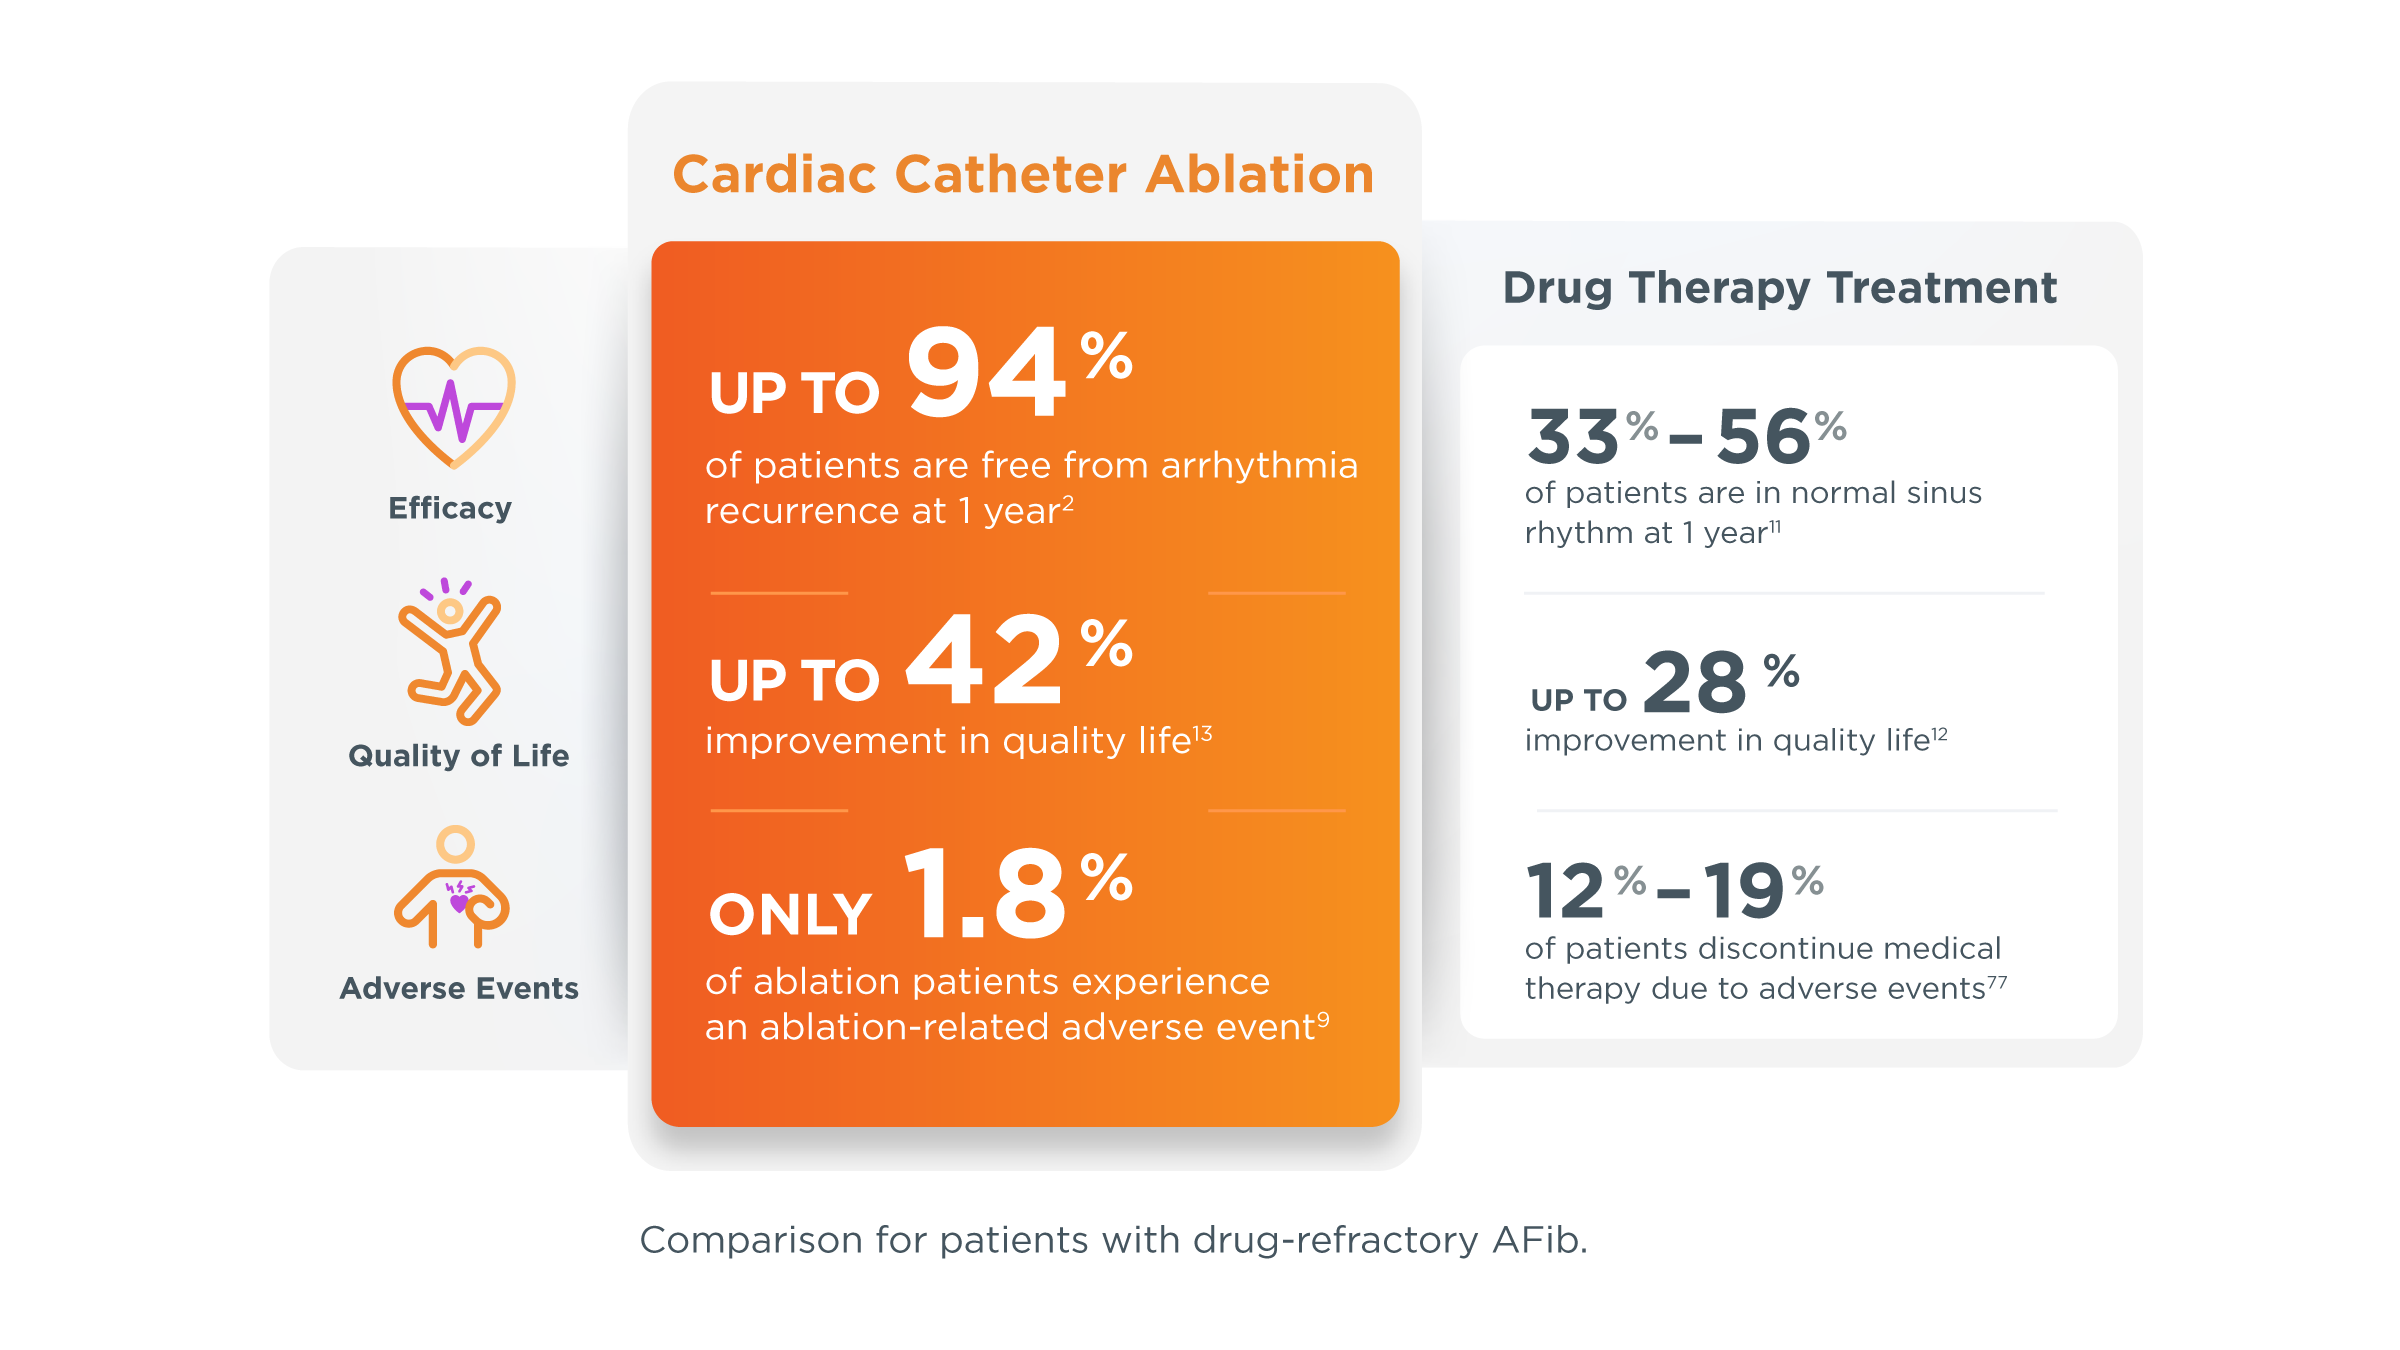 Table Comparing AFib Treatments: Drug Therapy vs. Cardiac Catheter Ablation